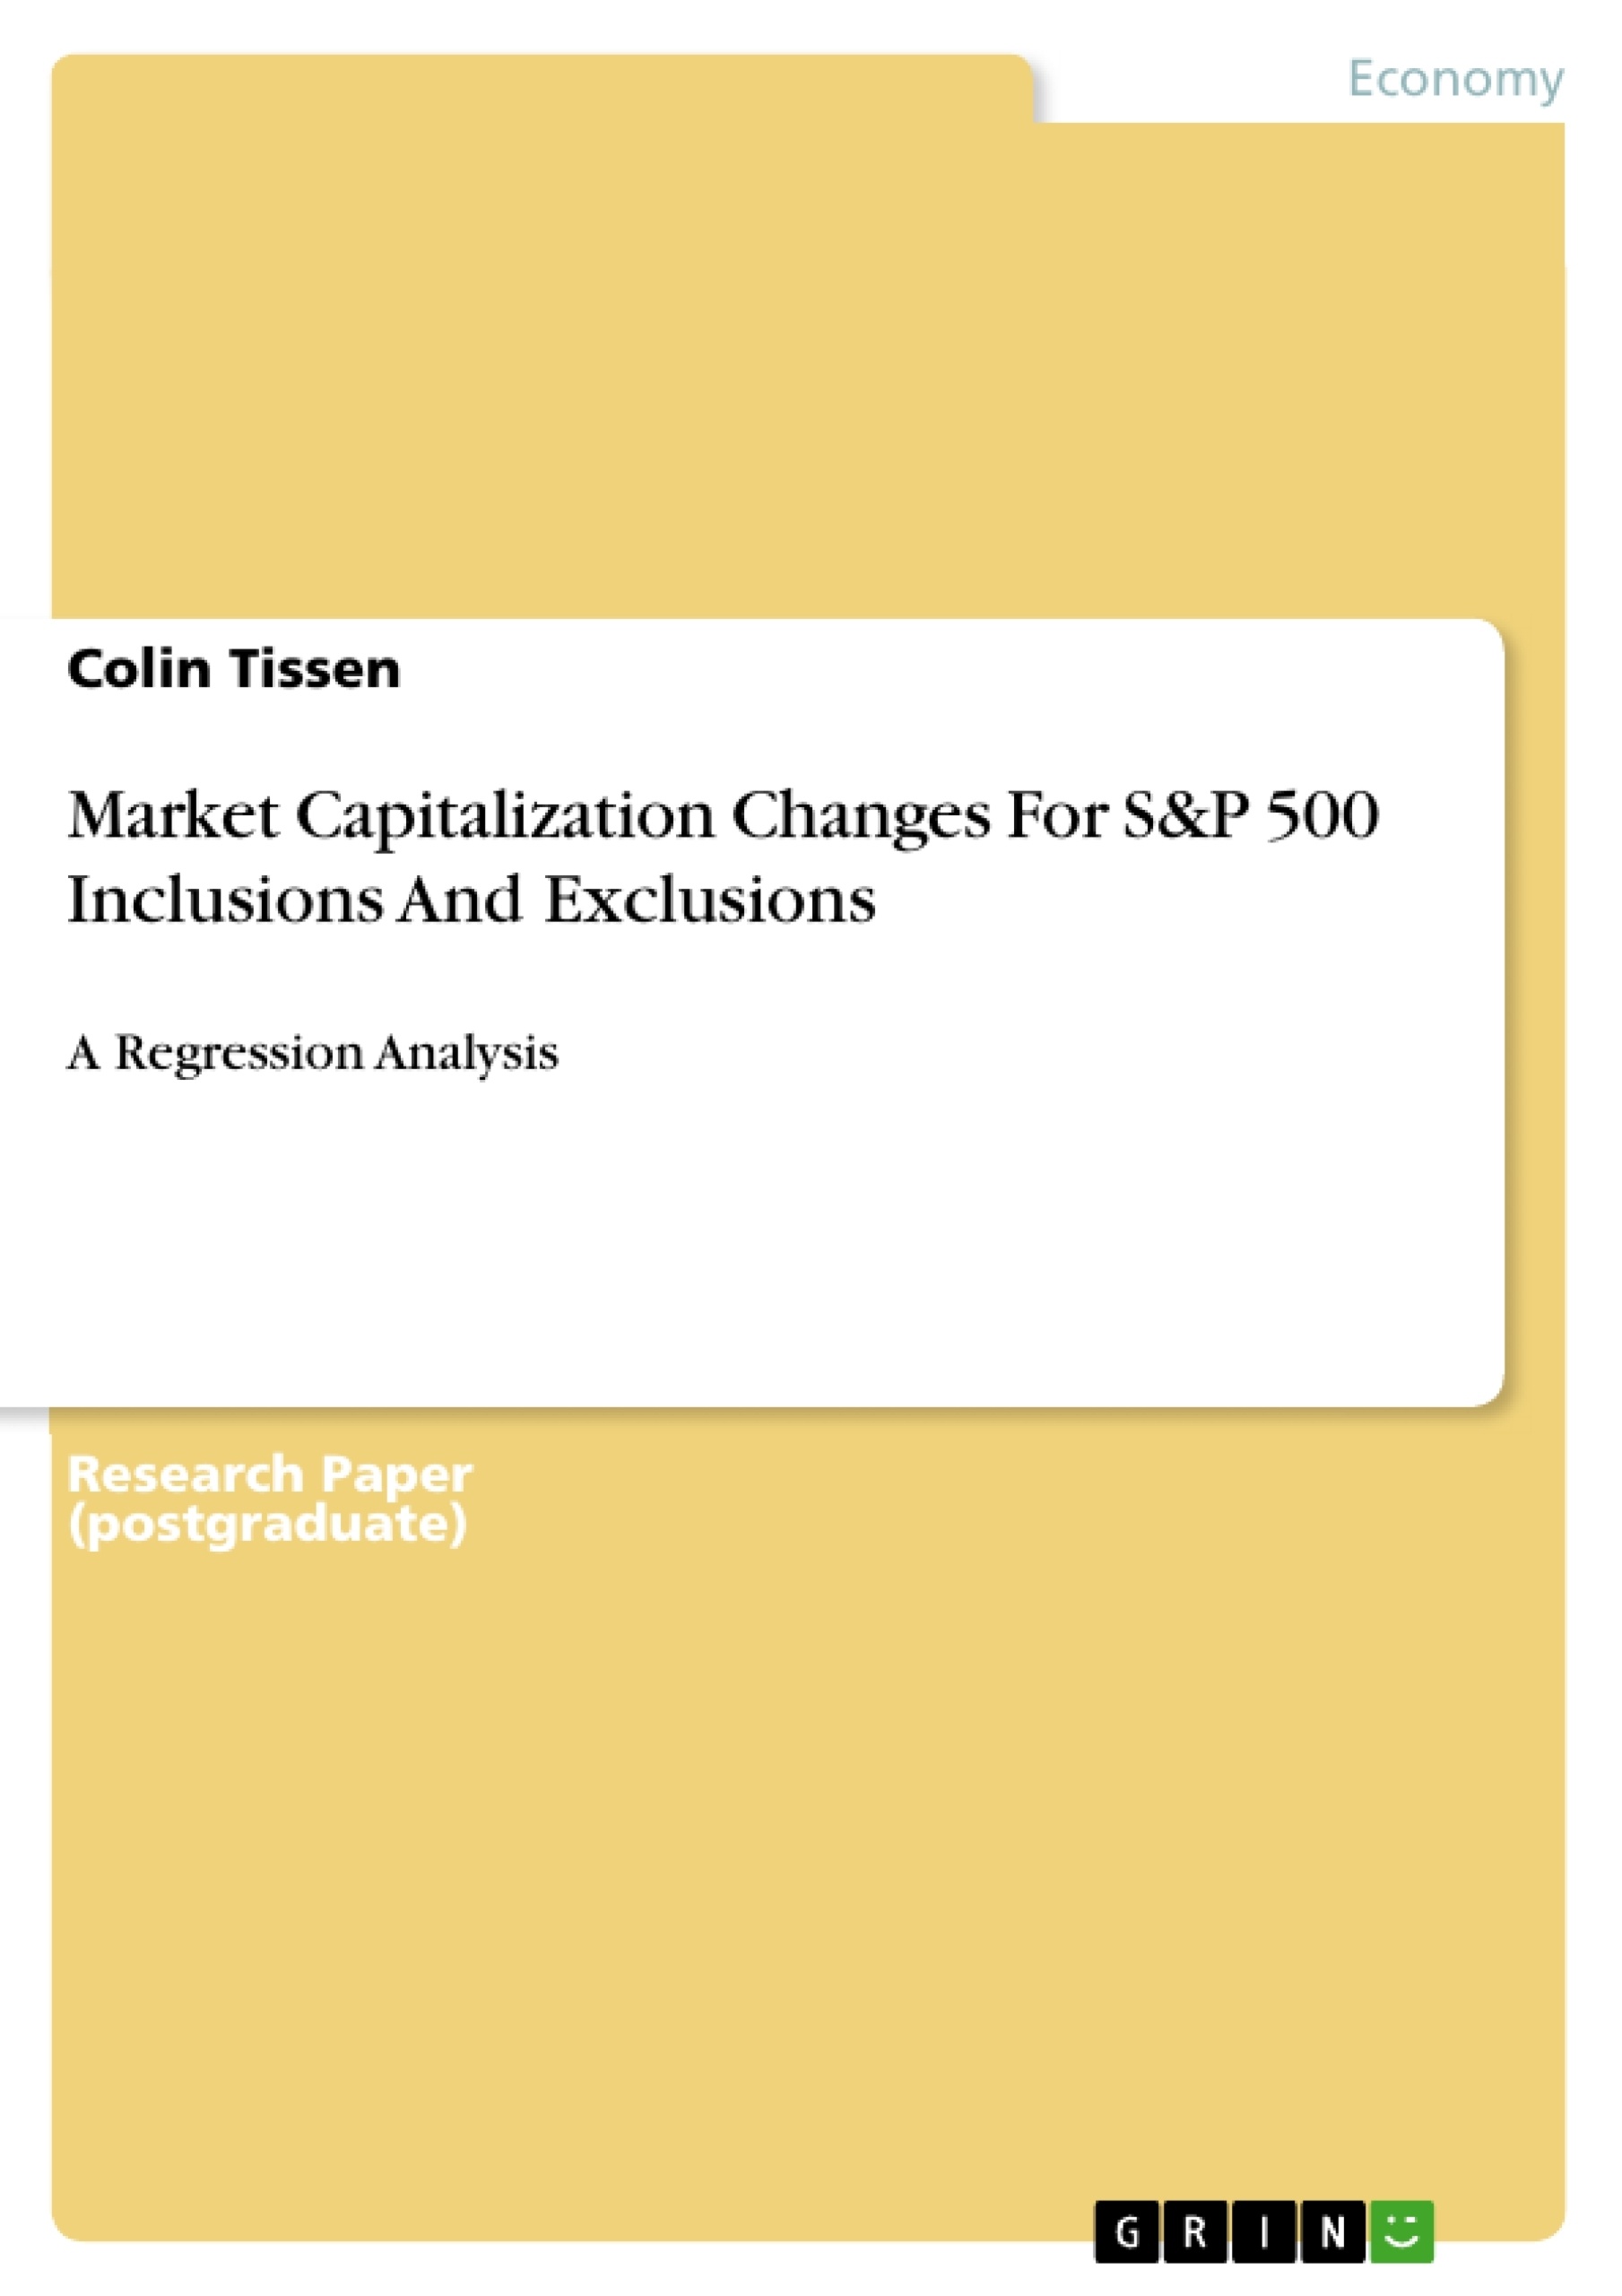 Titre: Market Capitalization Changes For S&P 500 Inclusions And Exclusions